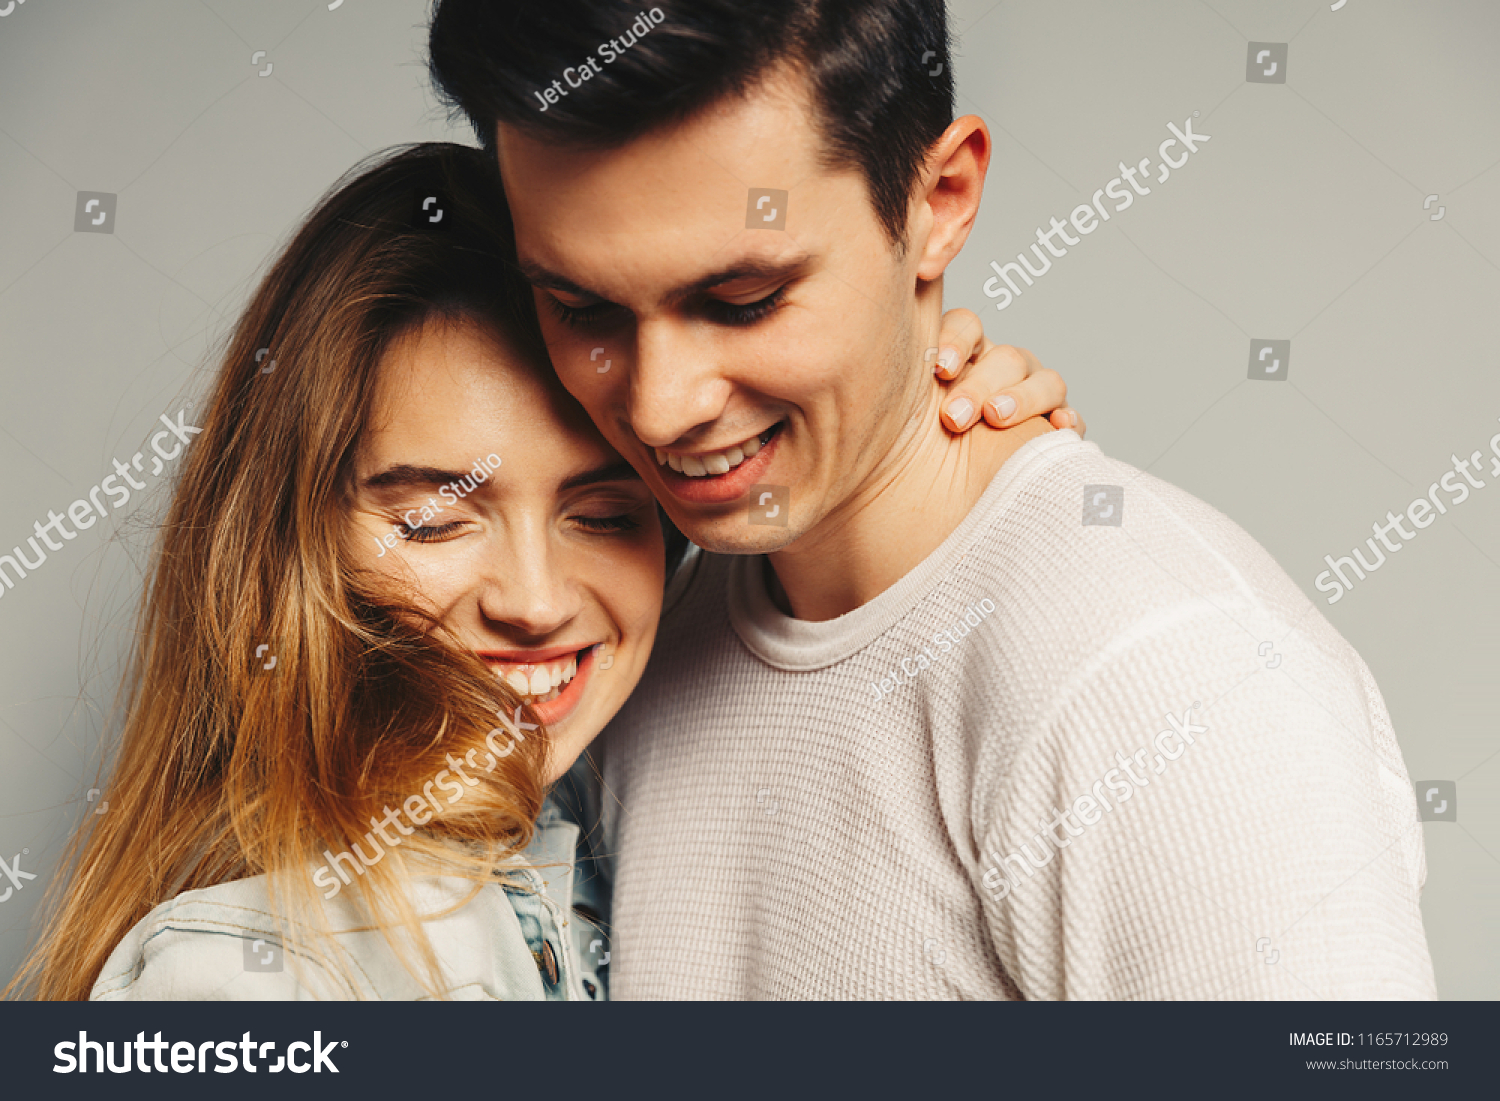 Portrait of beautiful young couple in casual clothes hugging and smiling, on gray background #1165712989